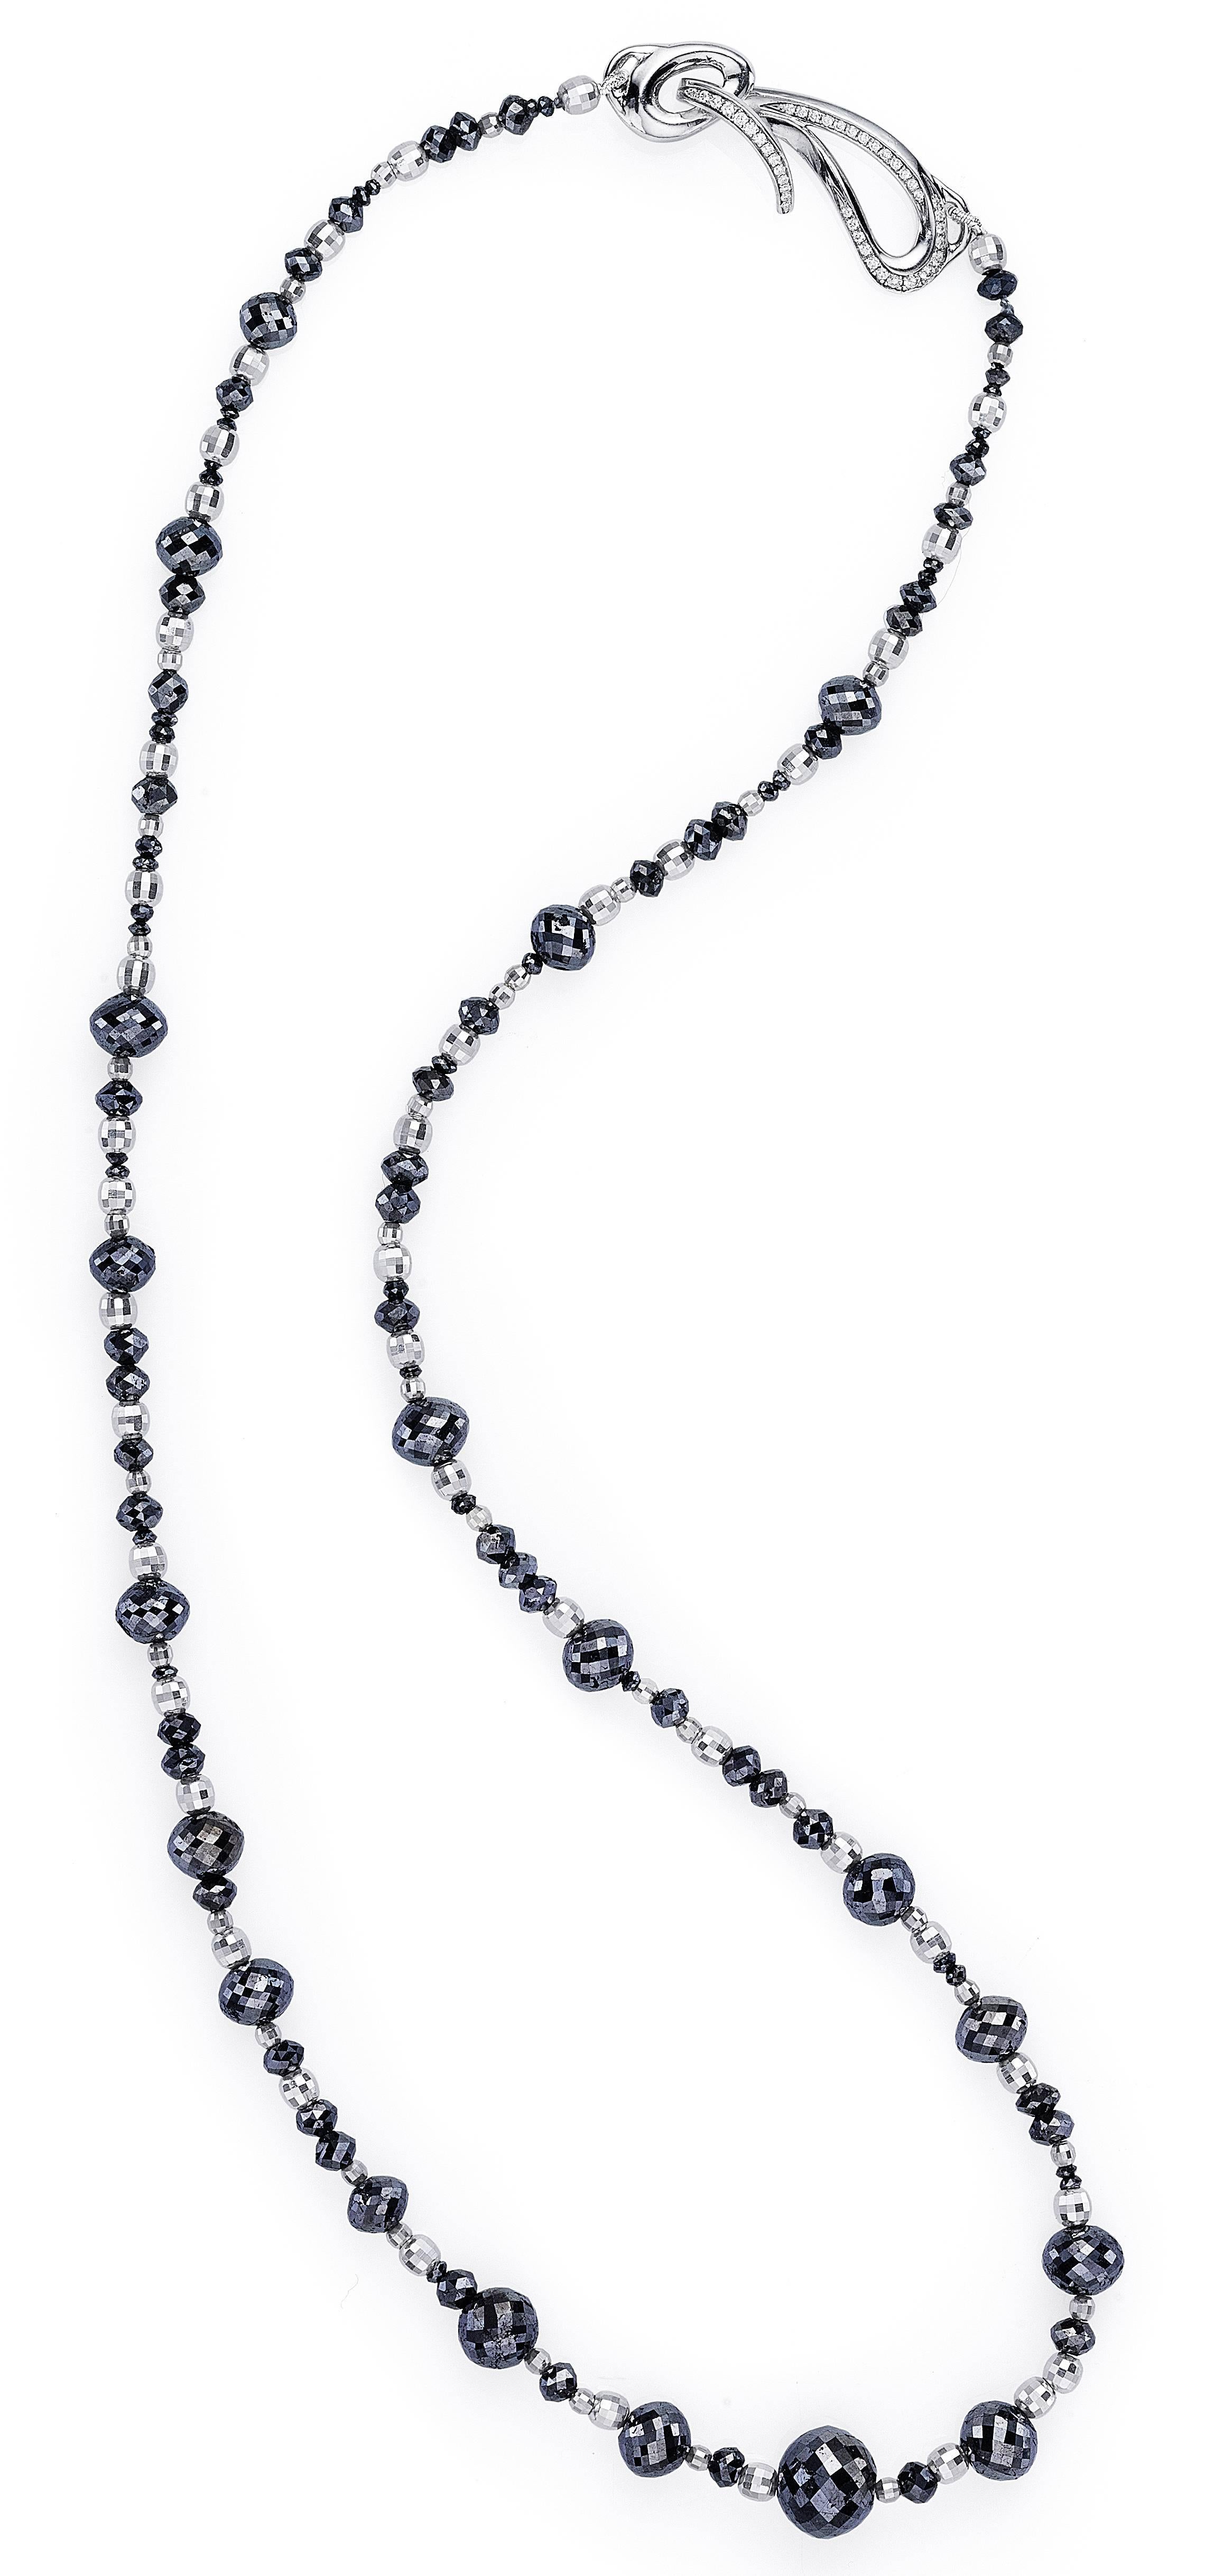 Simply elegant necklace featuring sparkling faceted black diamonds (55 ct total) separated by mirrored 14K white gold beads. Finished with Naomi's signature clasp in 18K white gold set with VS-FG white diamonds. ​

Available with a clasp with no